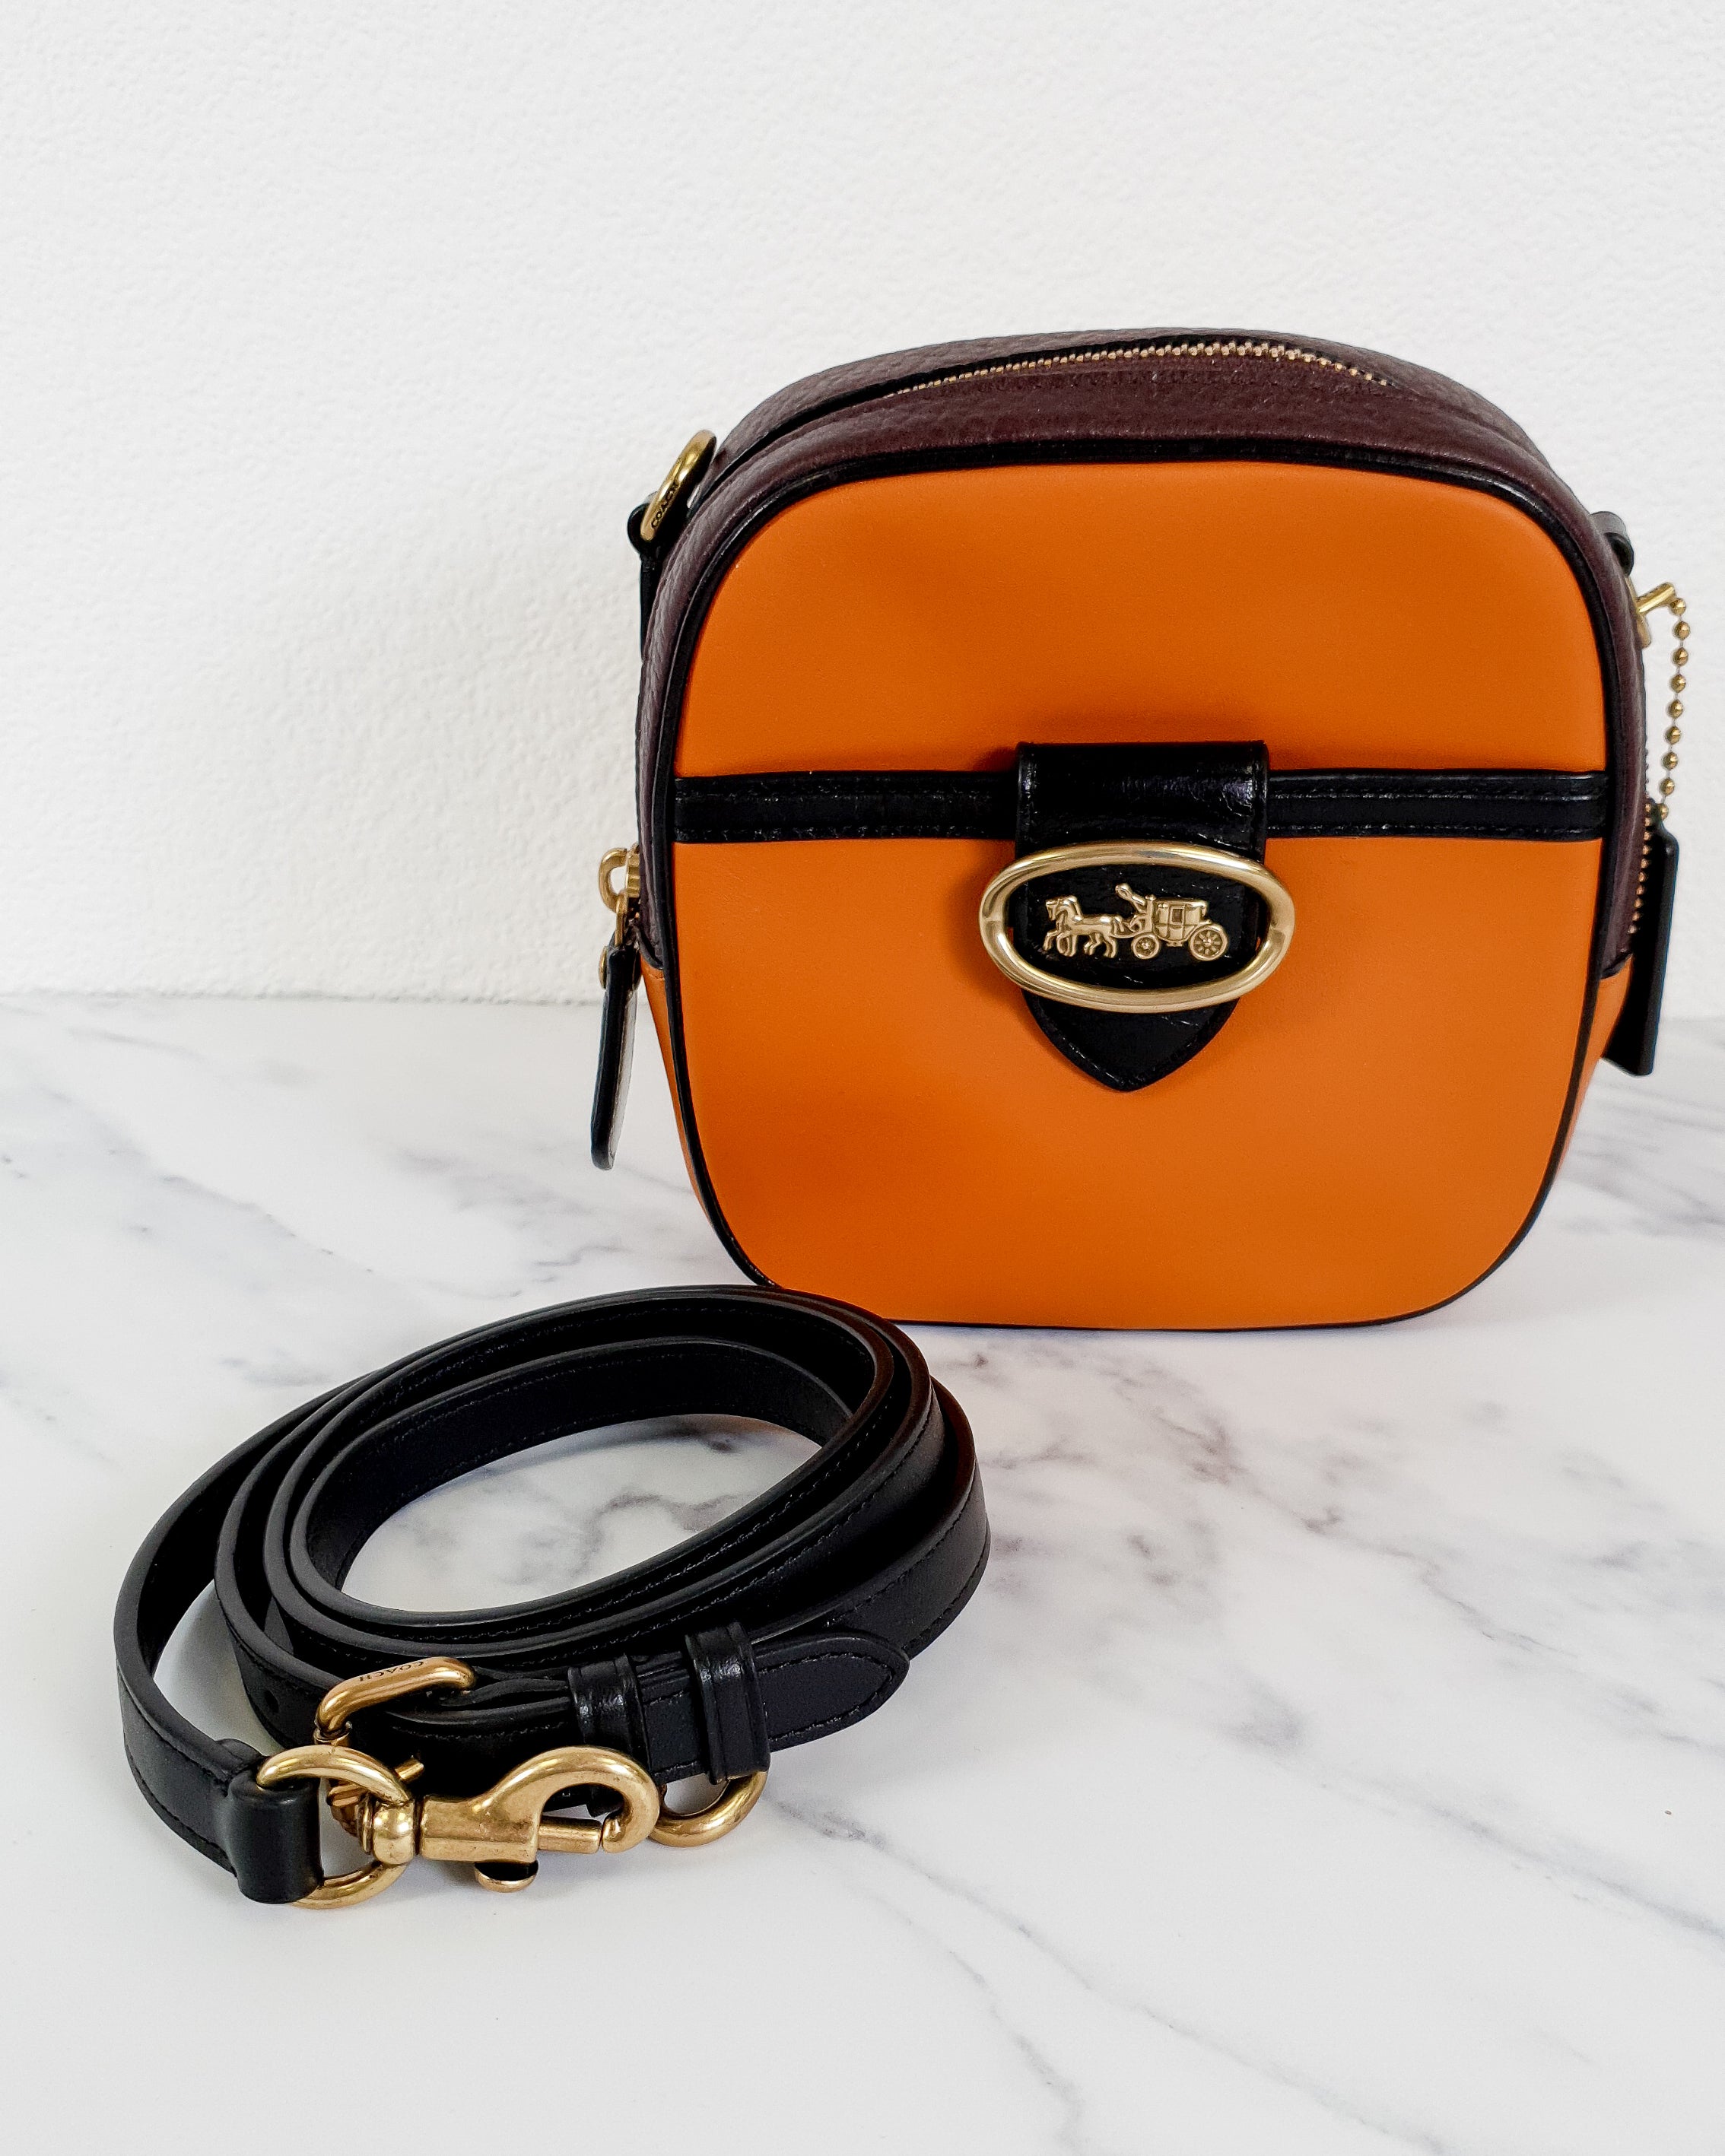 Coach Kat Camera Bag in Mustard Yellow Mixed Colorblock Leathers With Horse & Carriage Buckle - SAMPLE BAG Crossbody Bag - Coach 88224